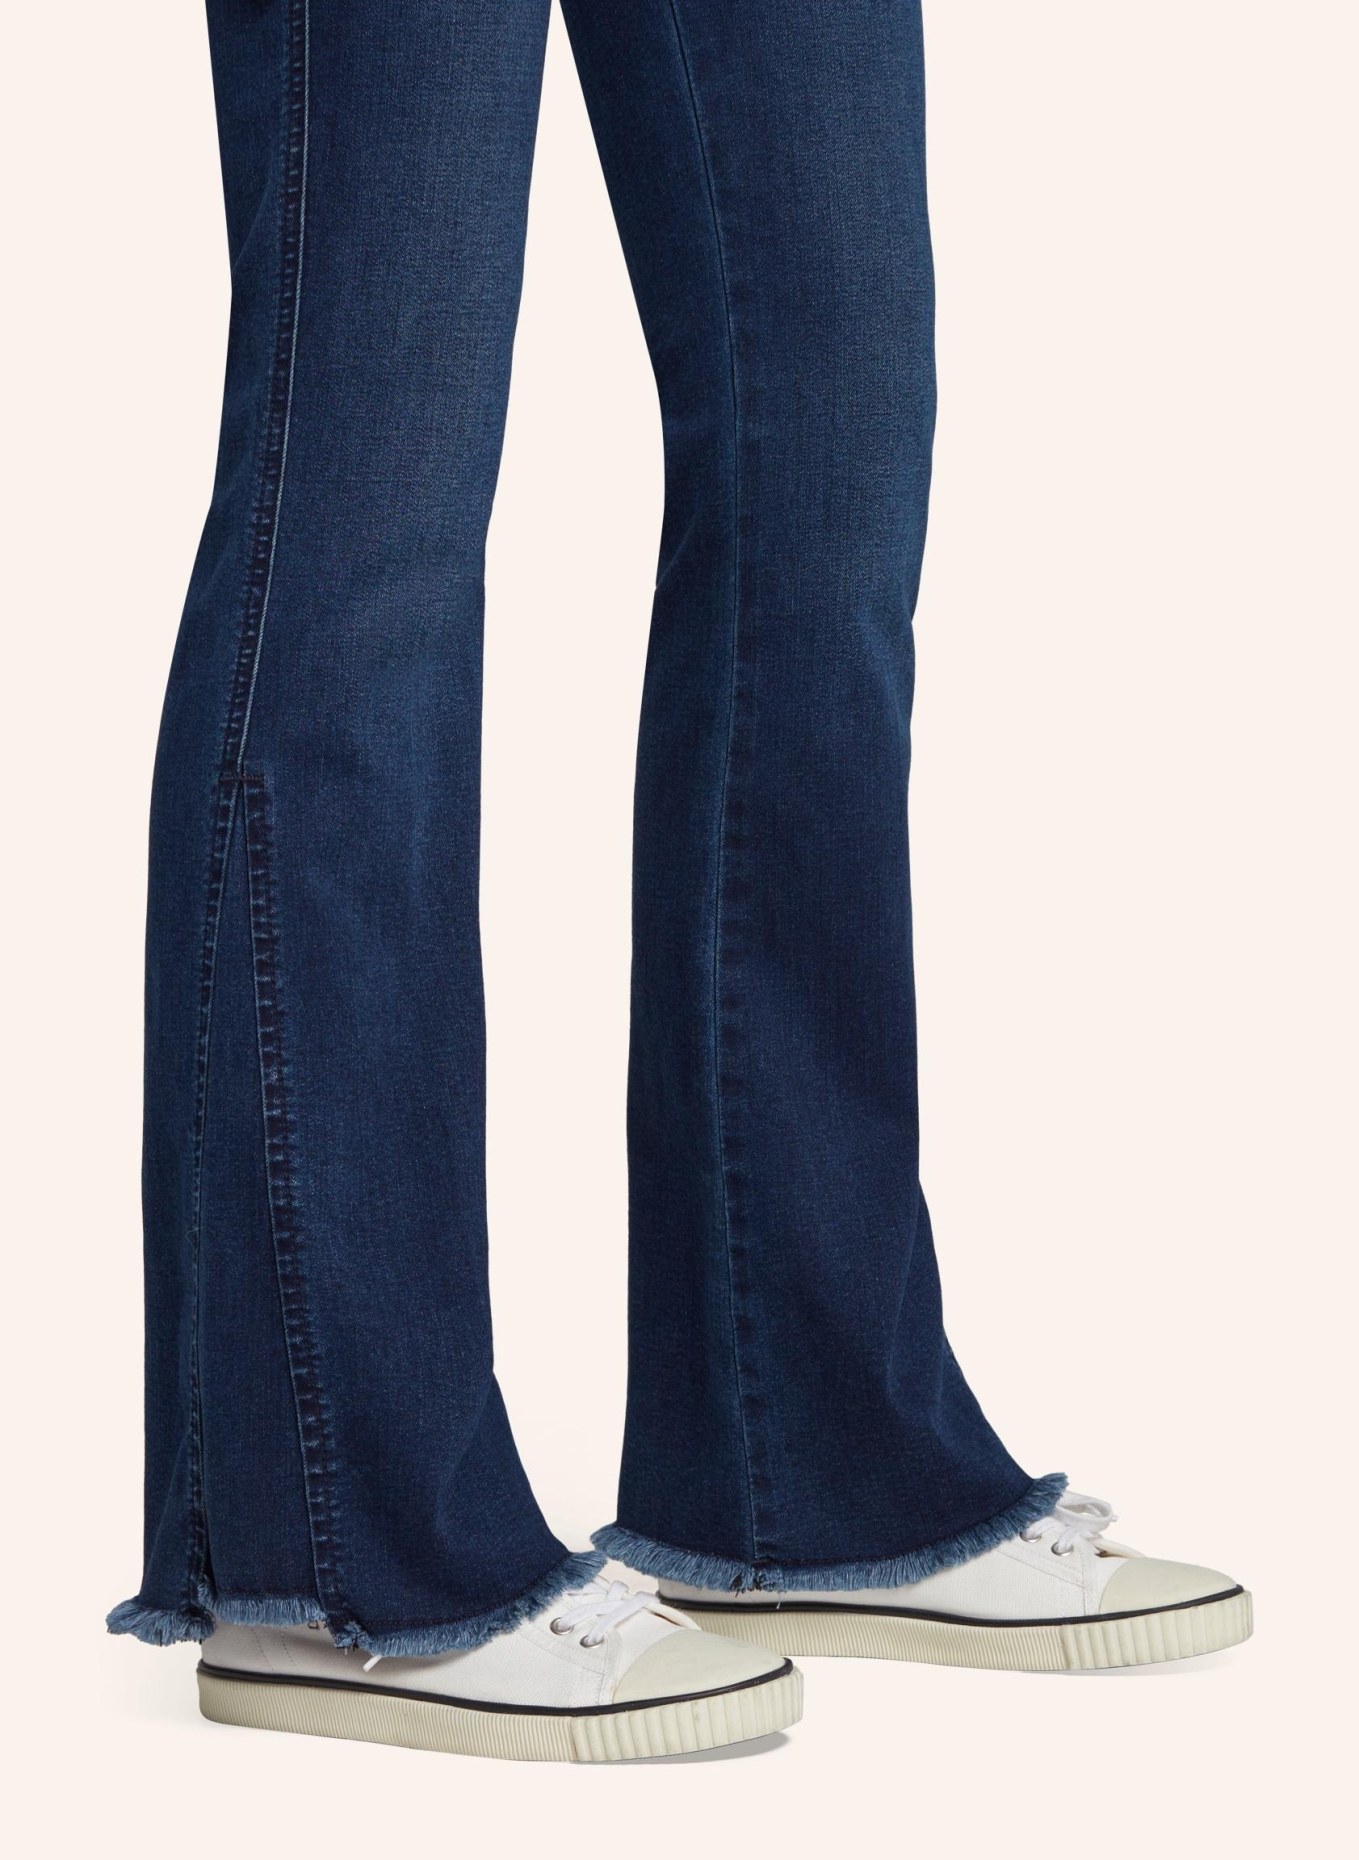 7 for all mankind Jeans BOOTCUT TAILORLESS Bootcut Fit, Farbe: BLAU (Bild 3)